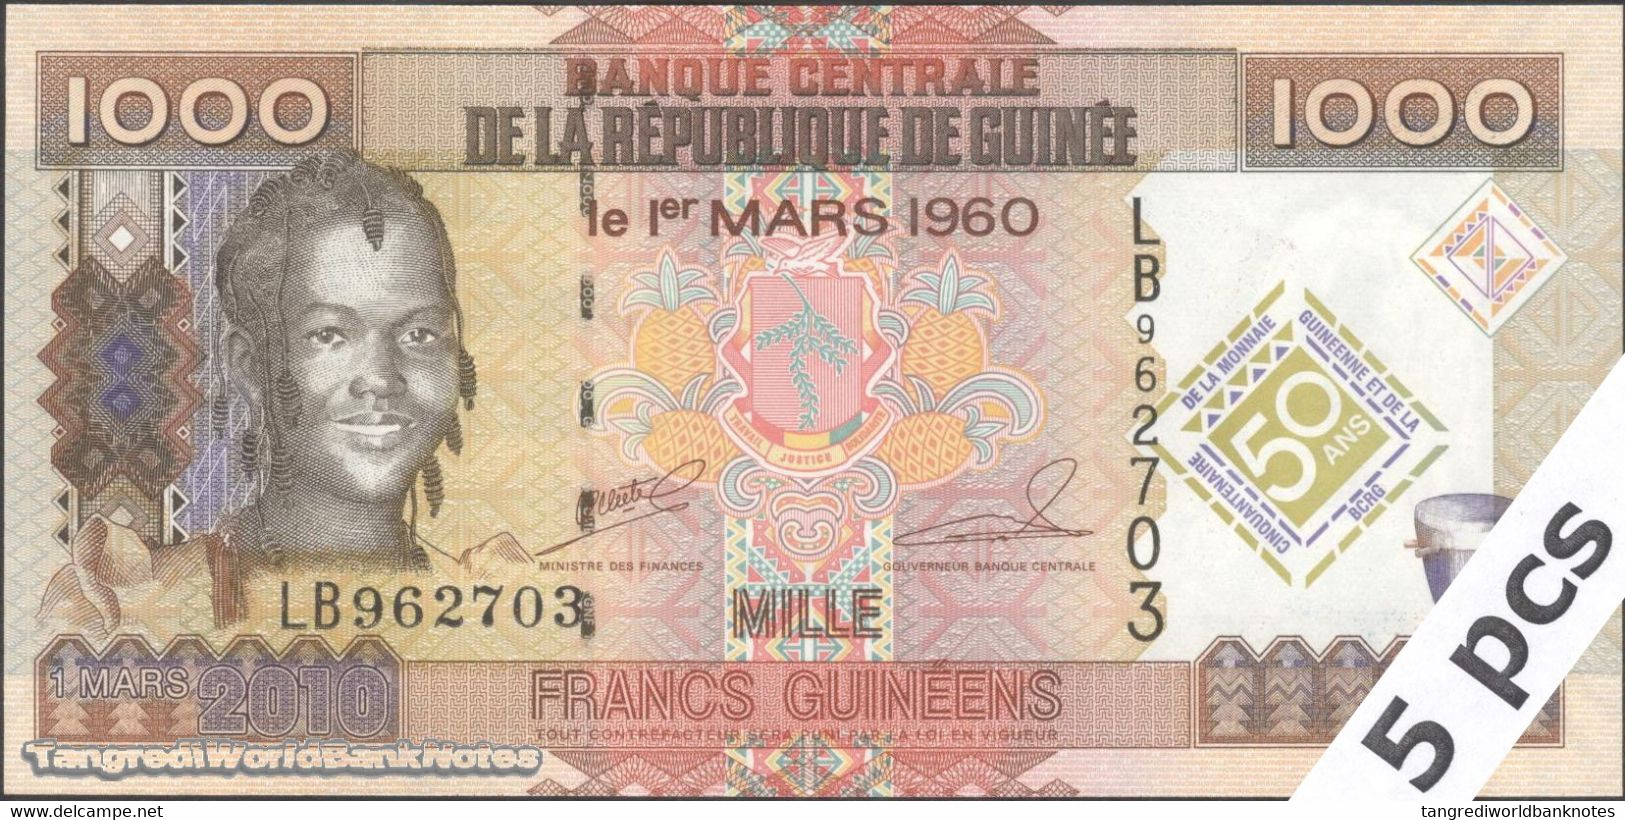 TWN - GUINEA 43a - 1000 1.000 Fr. 2010 DEALERS LOT X 5 - 50th Ann. Of Central Bank And Guinean Currency - Prefix LB UNC - Guinea